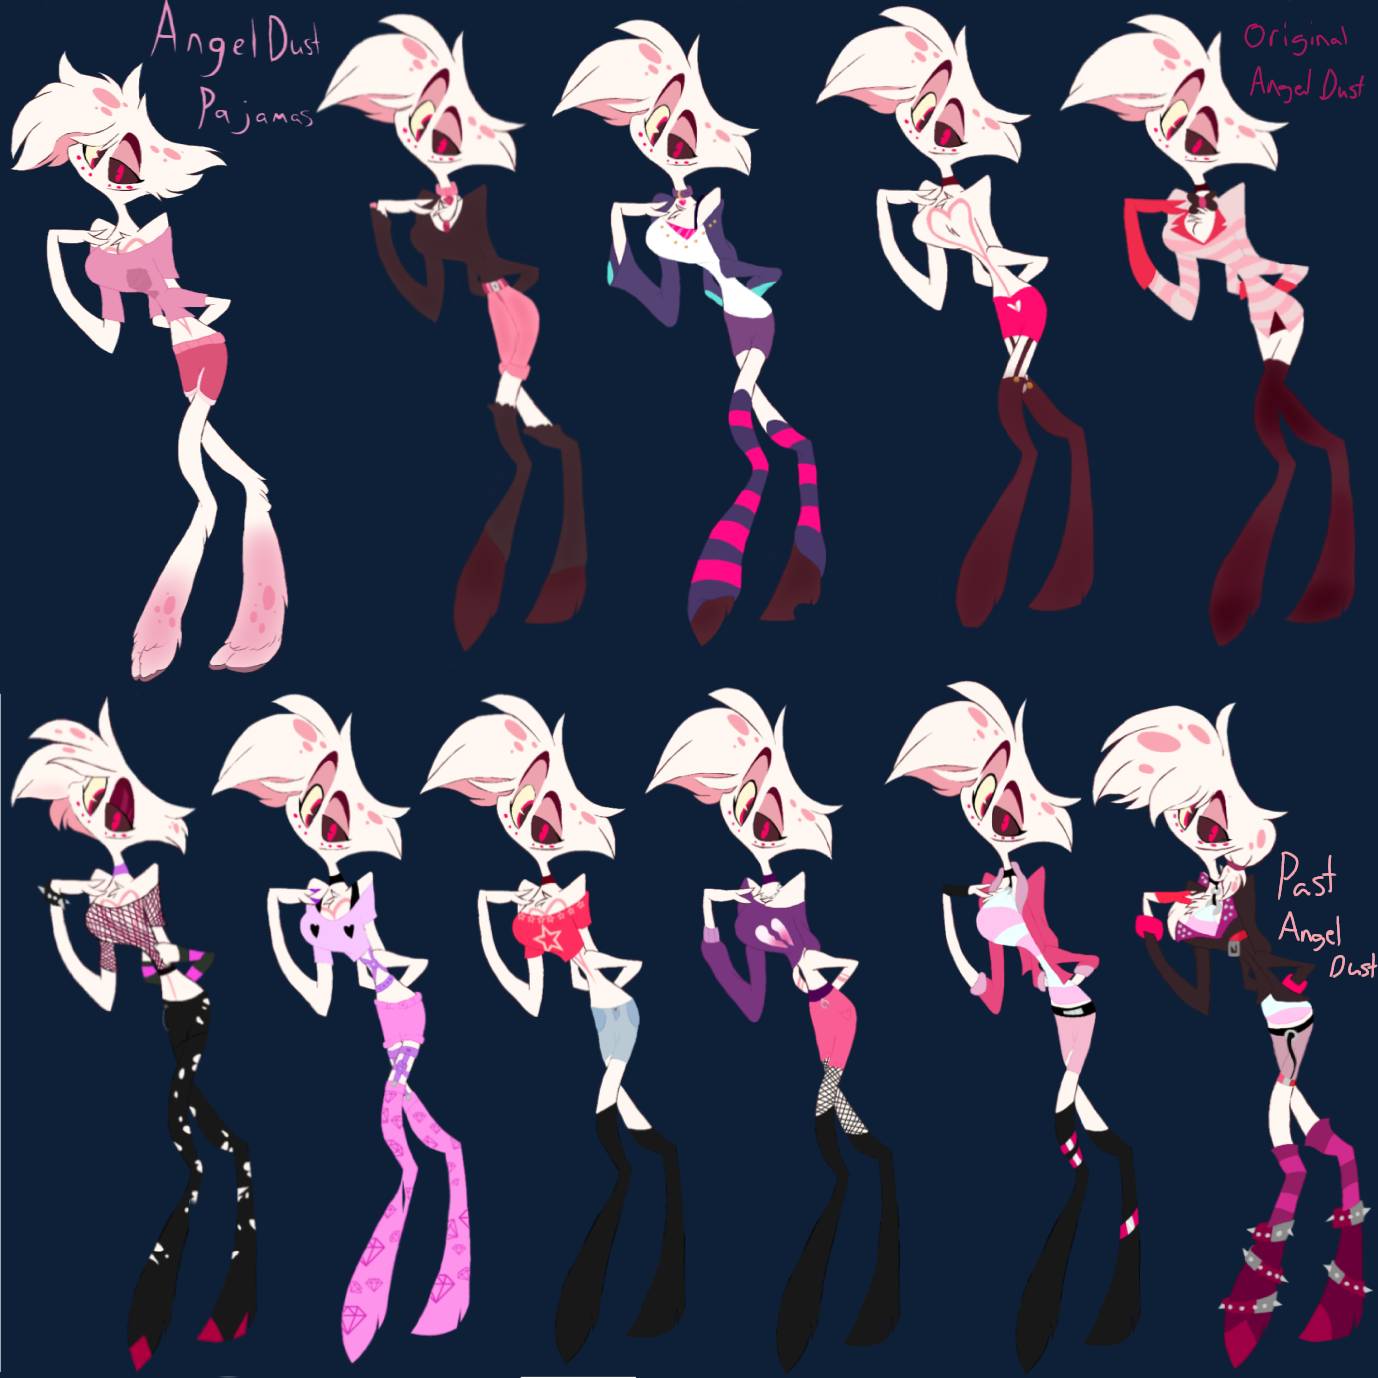 Angel Dust clothing reference by TheMiniCast on DeviantArt